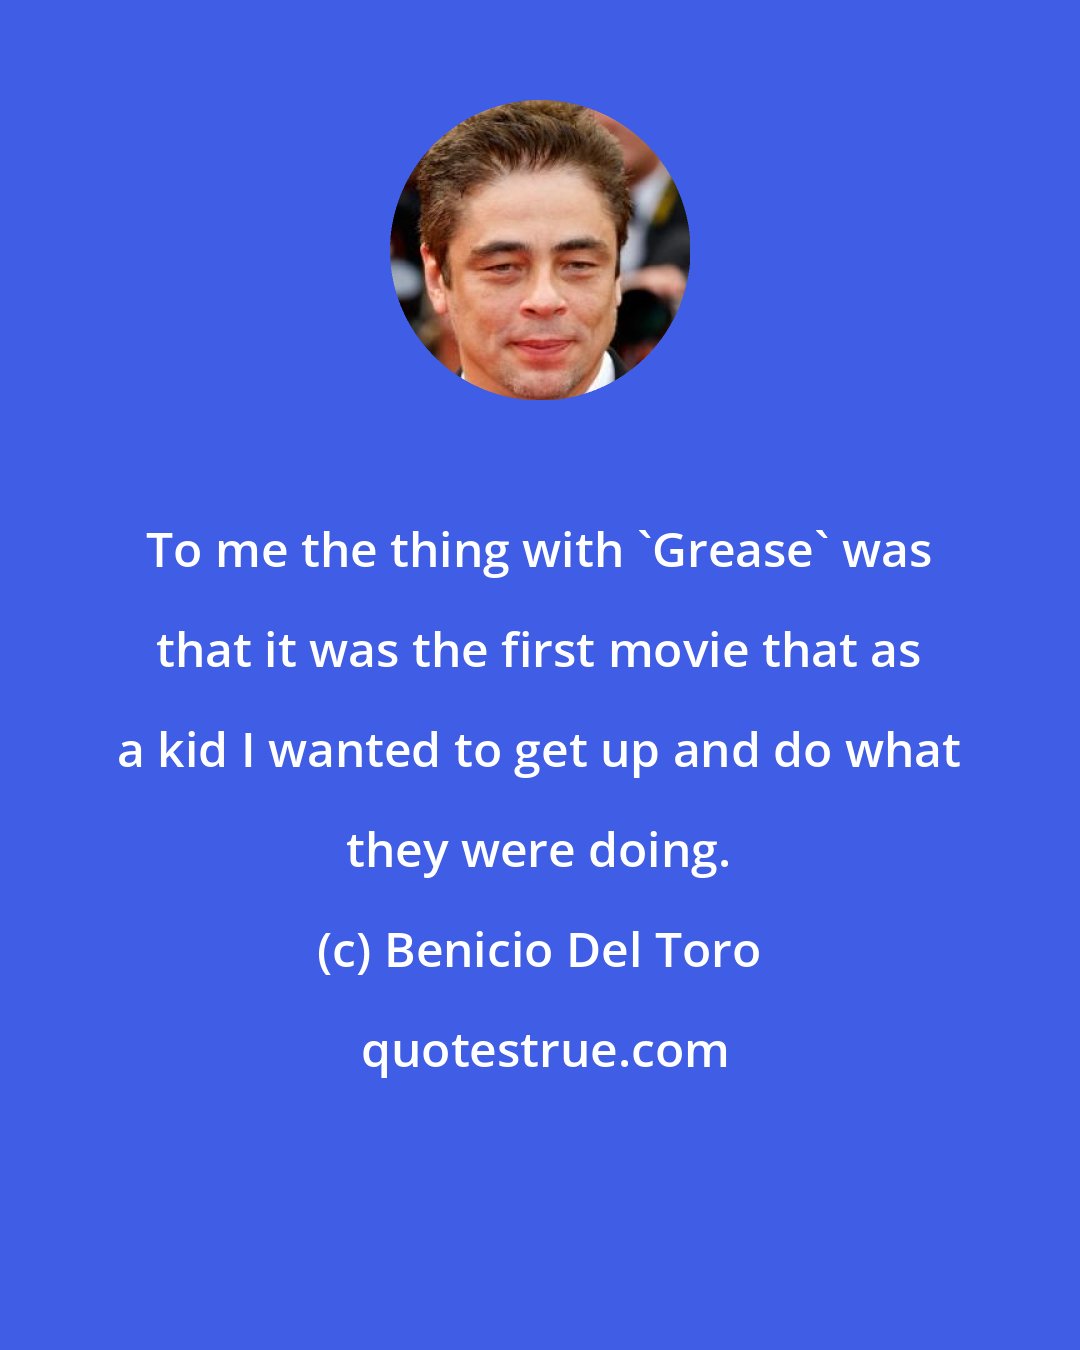 Benicio Del Toro: To me the thing with 'Grease' was that it was the first movie that as a kid I wanted to get up and do what they were doing.